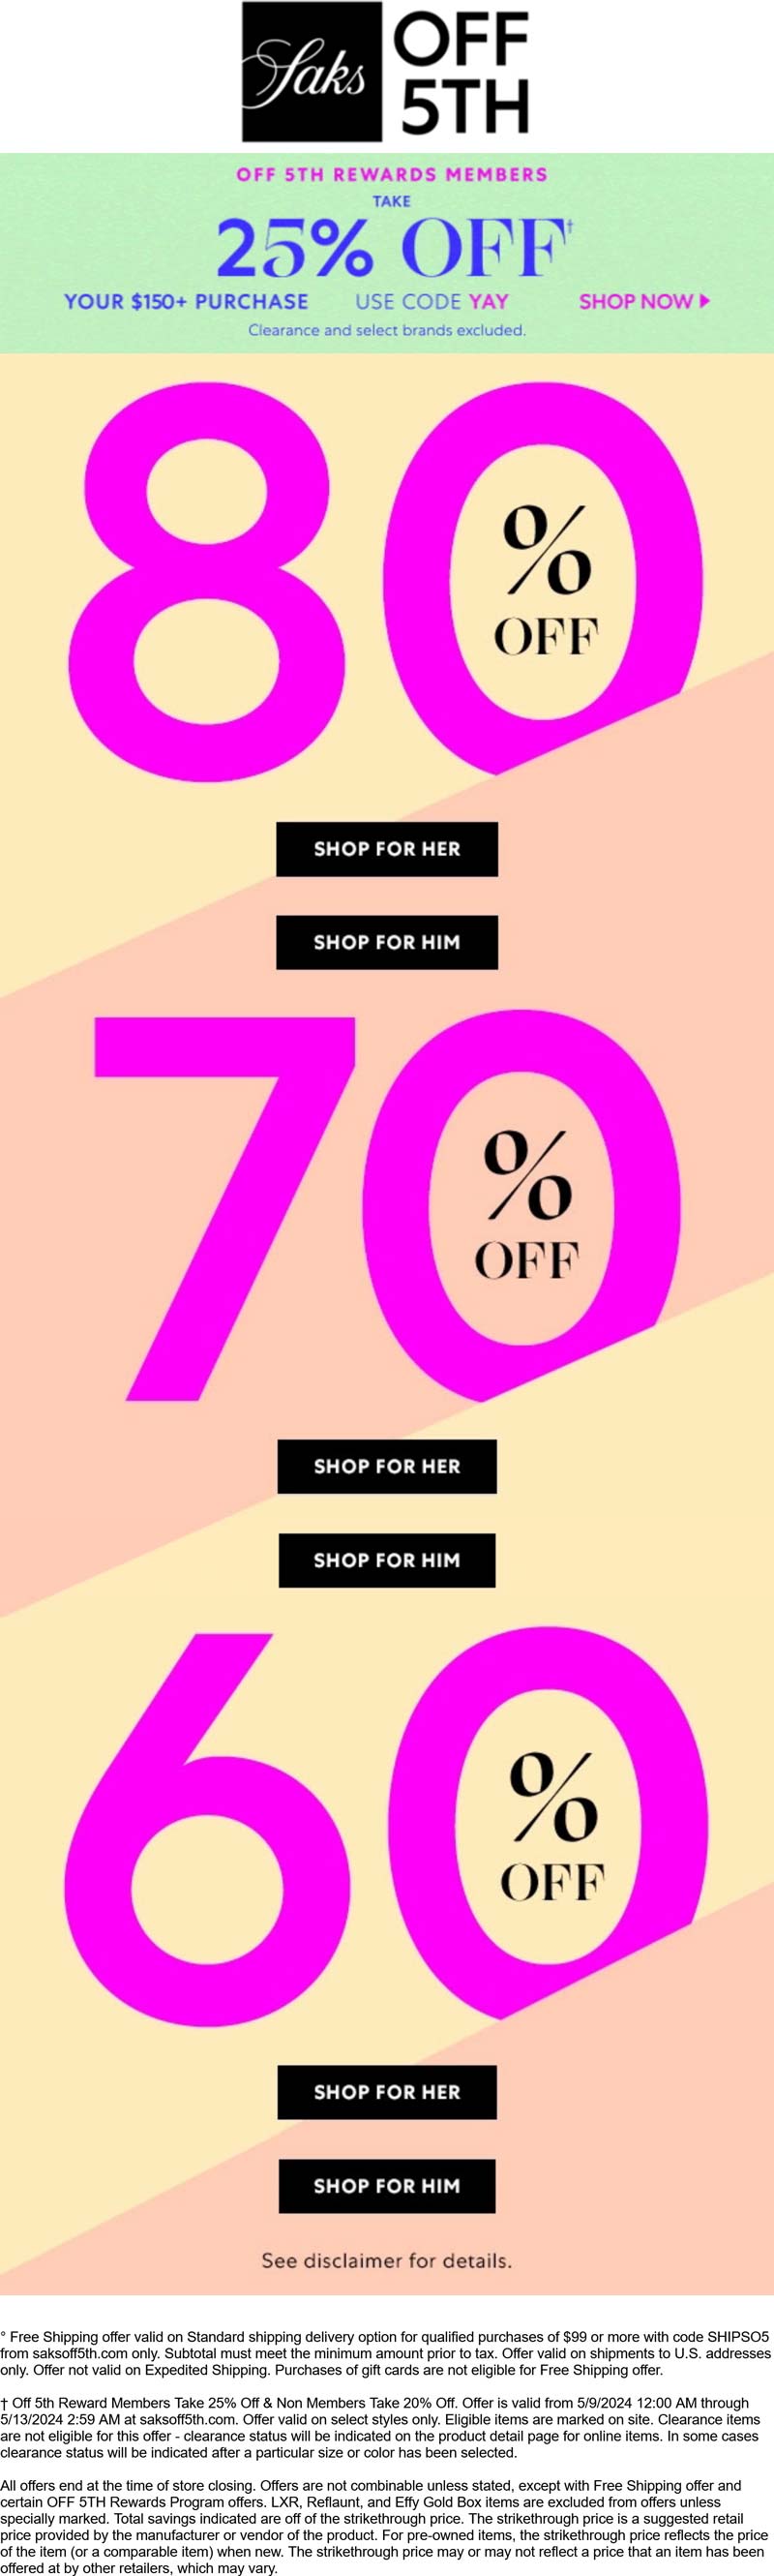 Saks OFF 5TH stores Coupon  20-25% off $150+ today at Saks OFF 5TH via promo code YAY #saksoff5th 